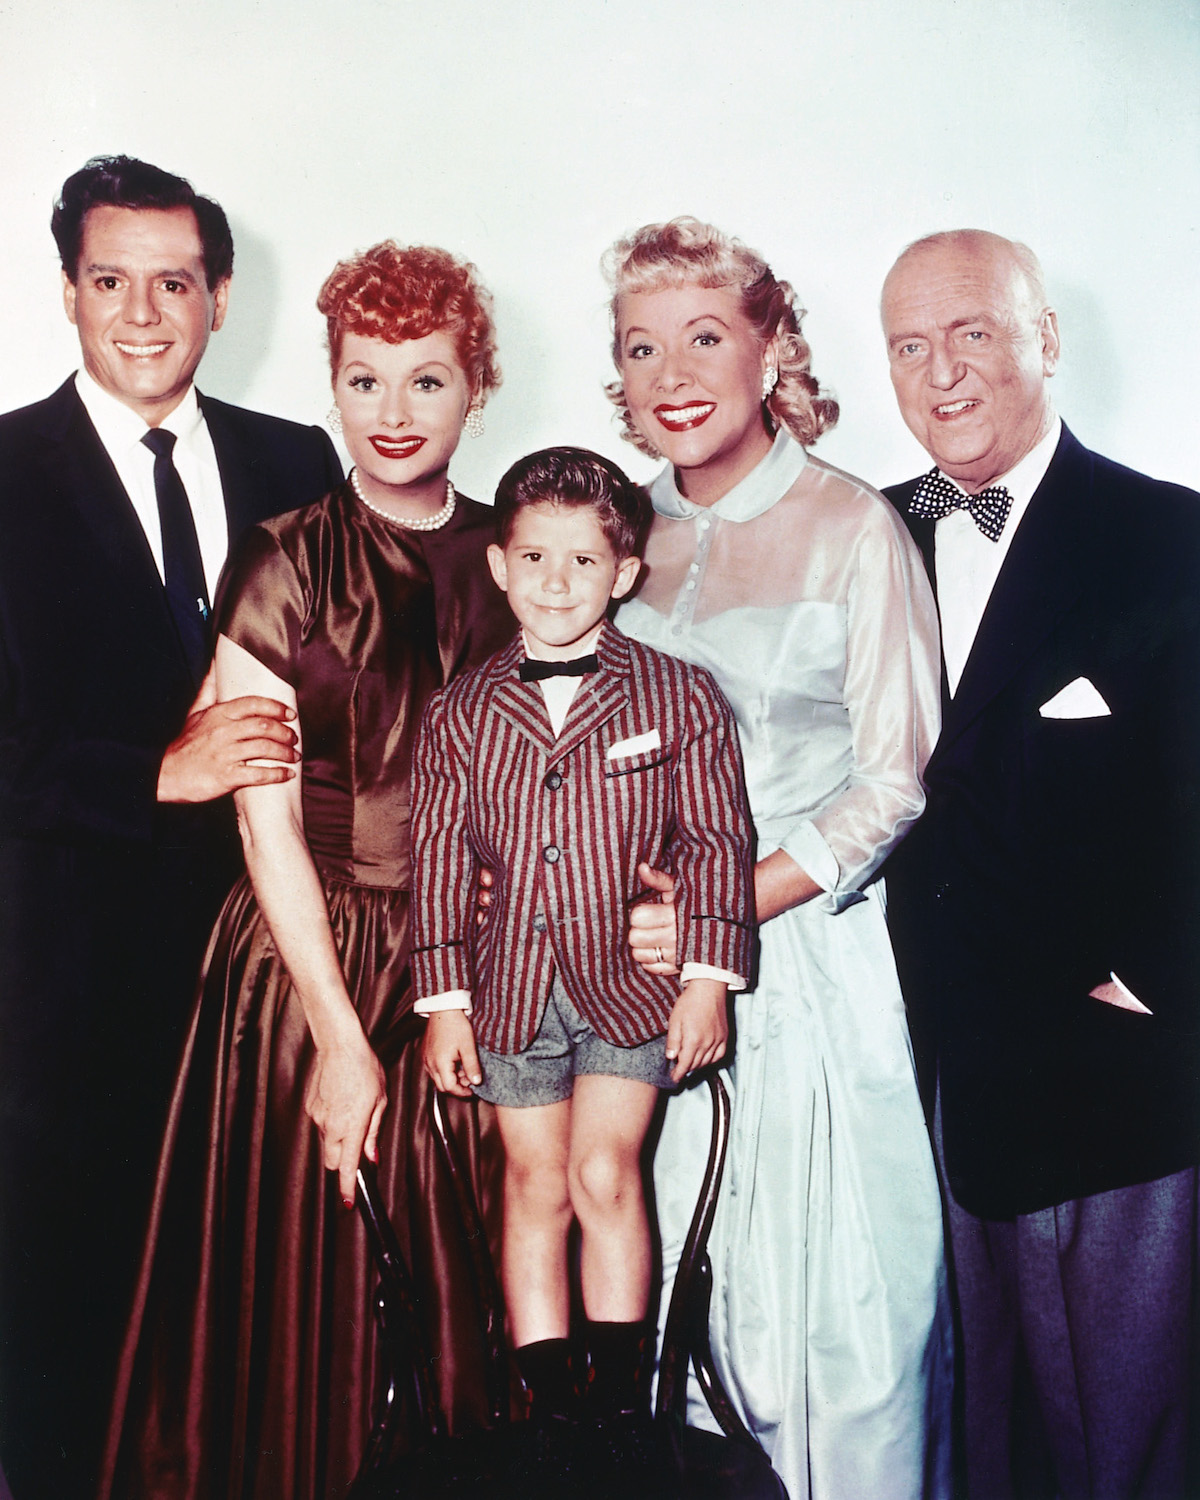 Desi Arnaz, Lucille Ball, Keith Thibodeaux, Vivian Vance, and William Frawley pose together